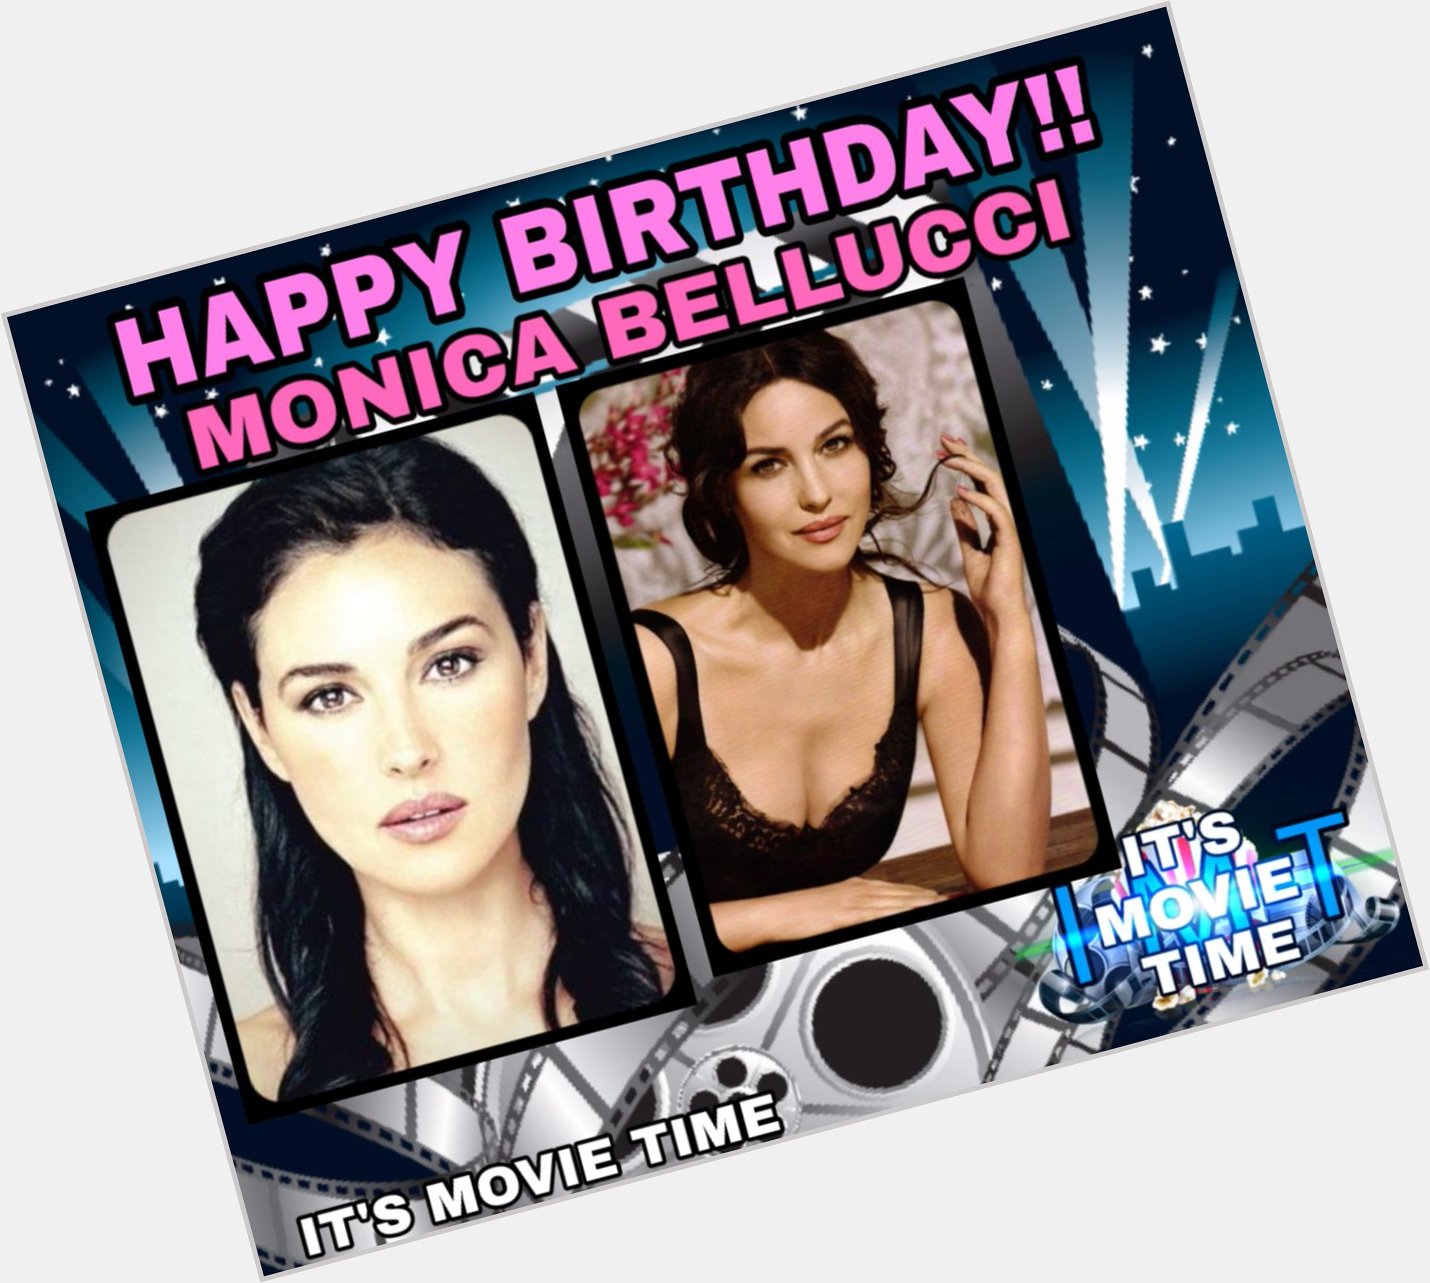 Happy Birthday to Monica Bellucci! The actress is celebrating 56 years. 